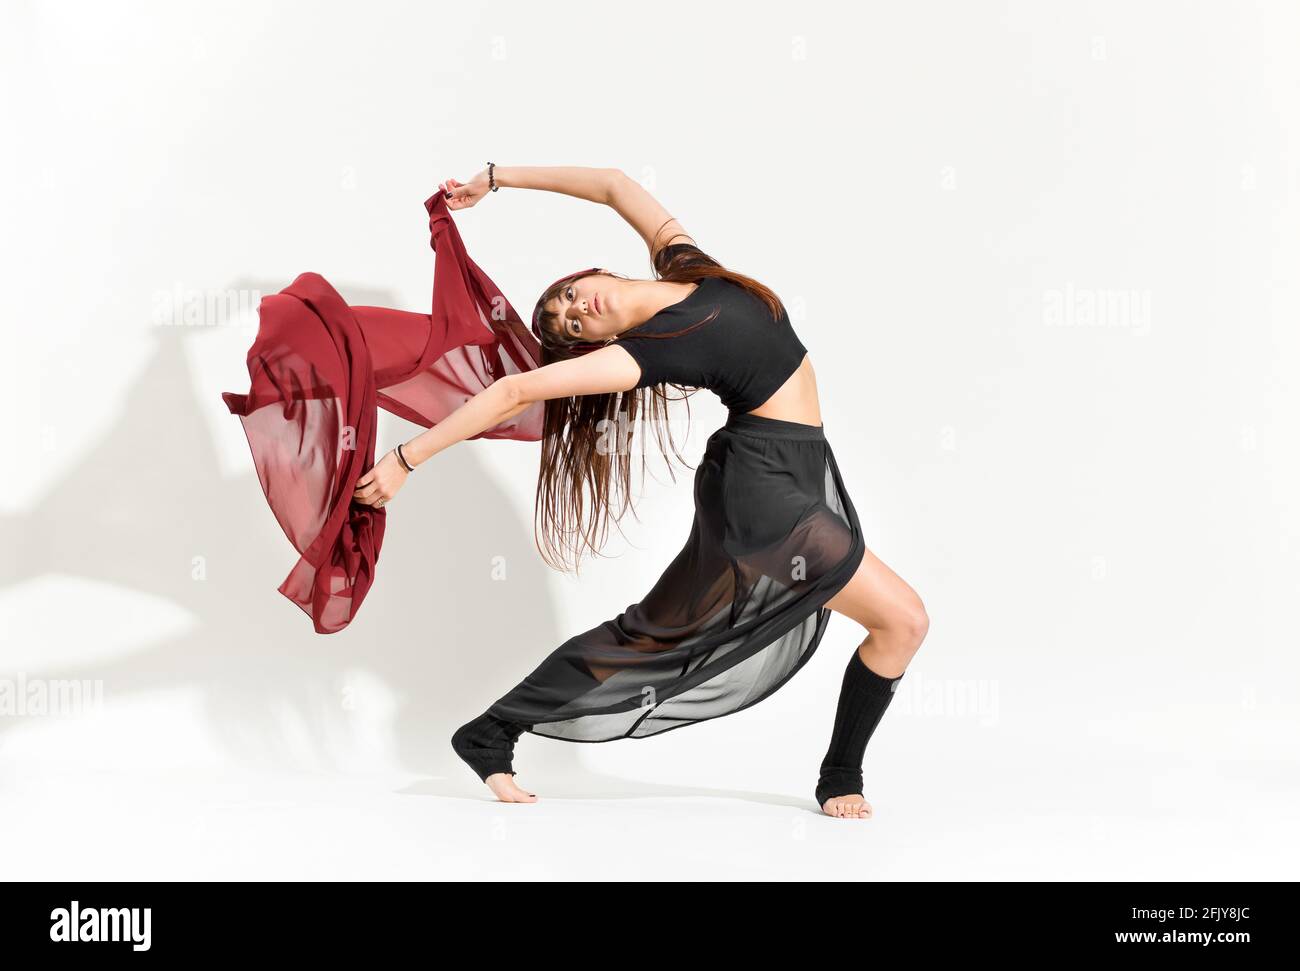 Graceful dance performing an Ina Bauer figure skating pose in a filmy black costume floating a rectangle of red fabric behind her on white with shadow Stock Photo